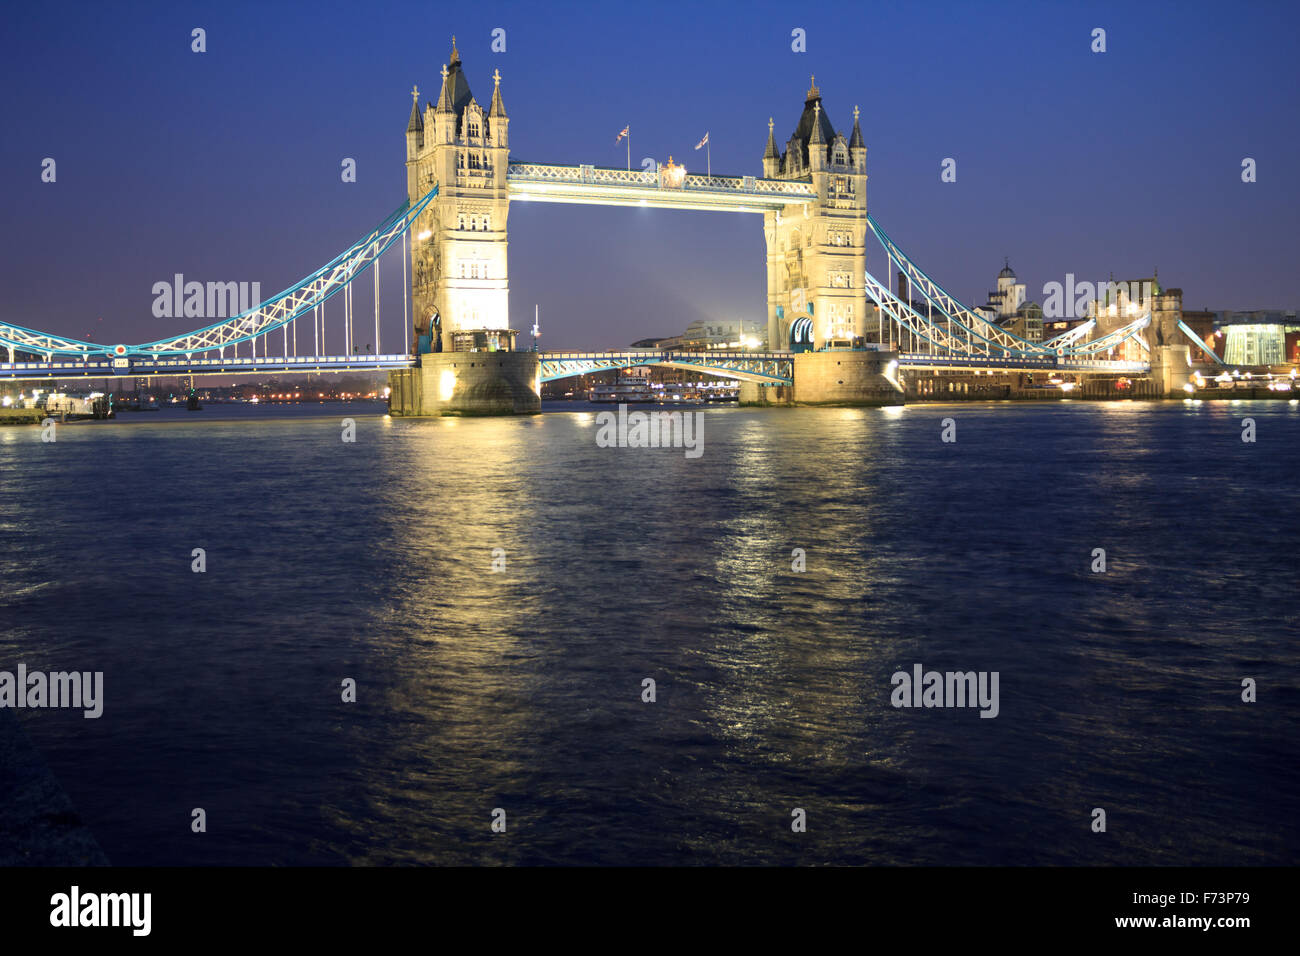 Night scene of the historic Tower Bridge in the calm River THames, London, England Stock Photo